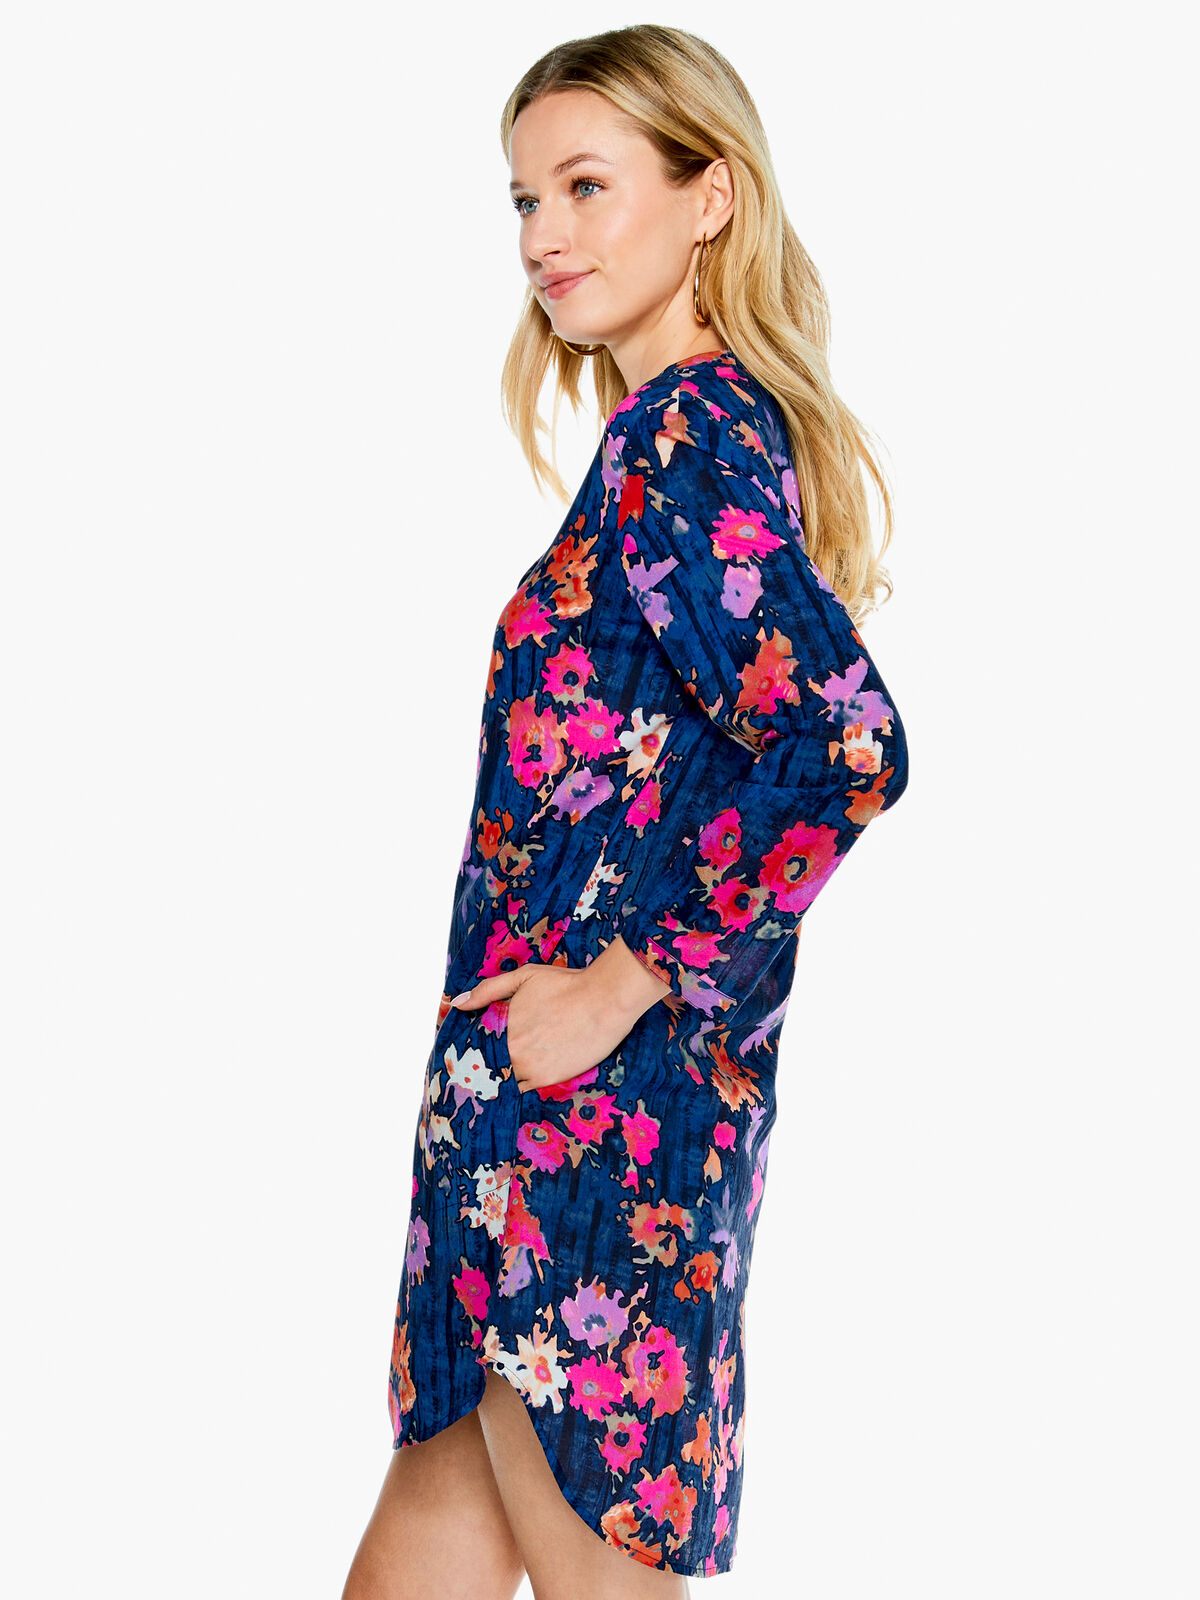 Glowing Blossoms Crinkle Tunic Dress